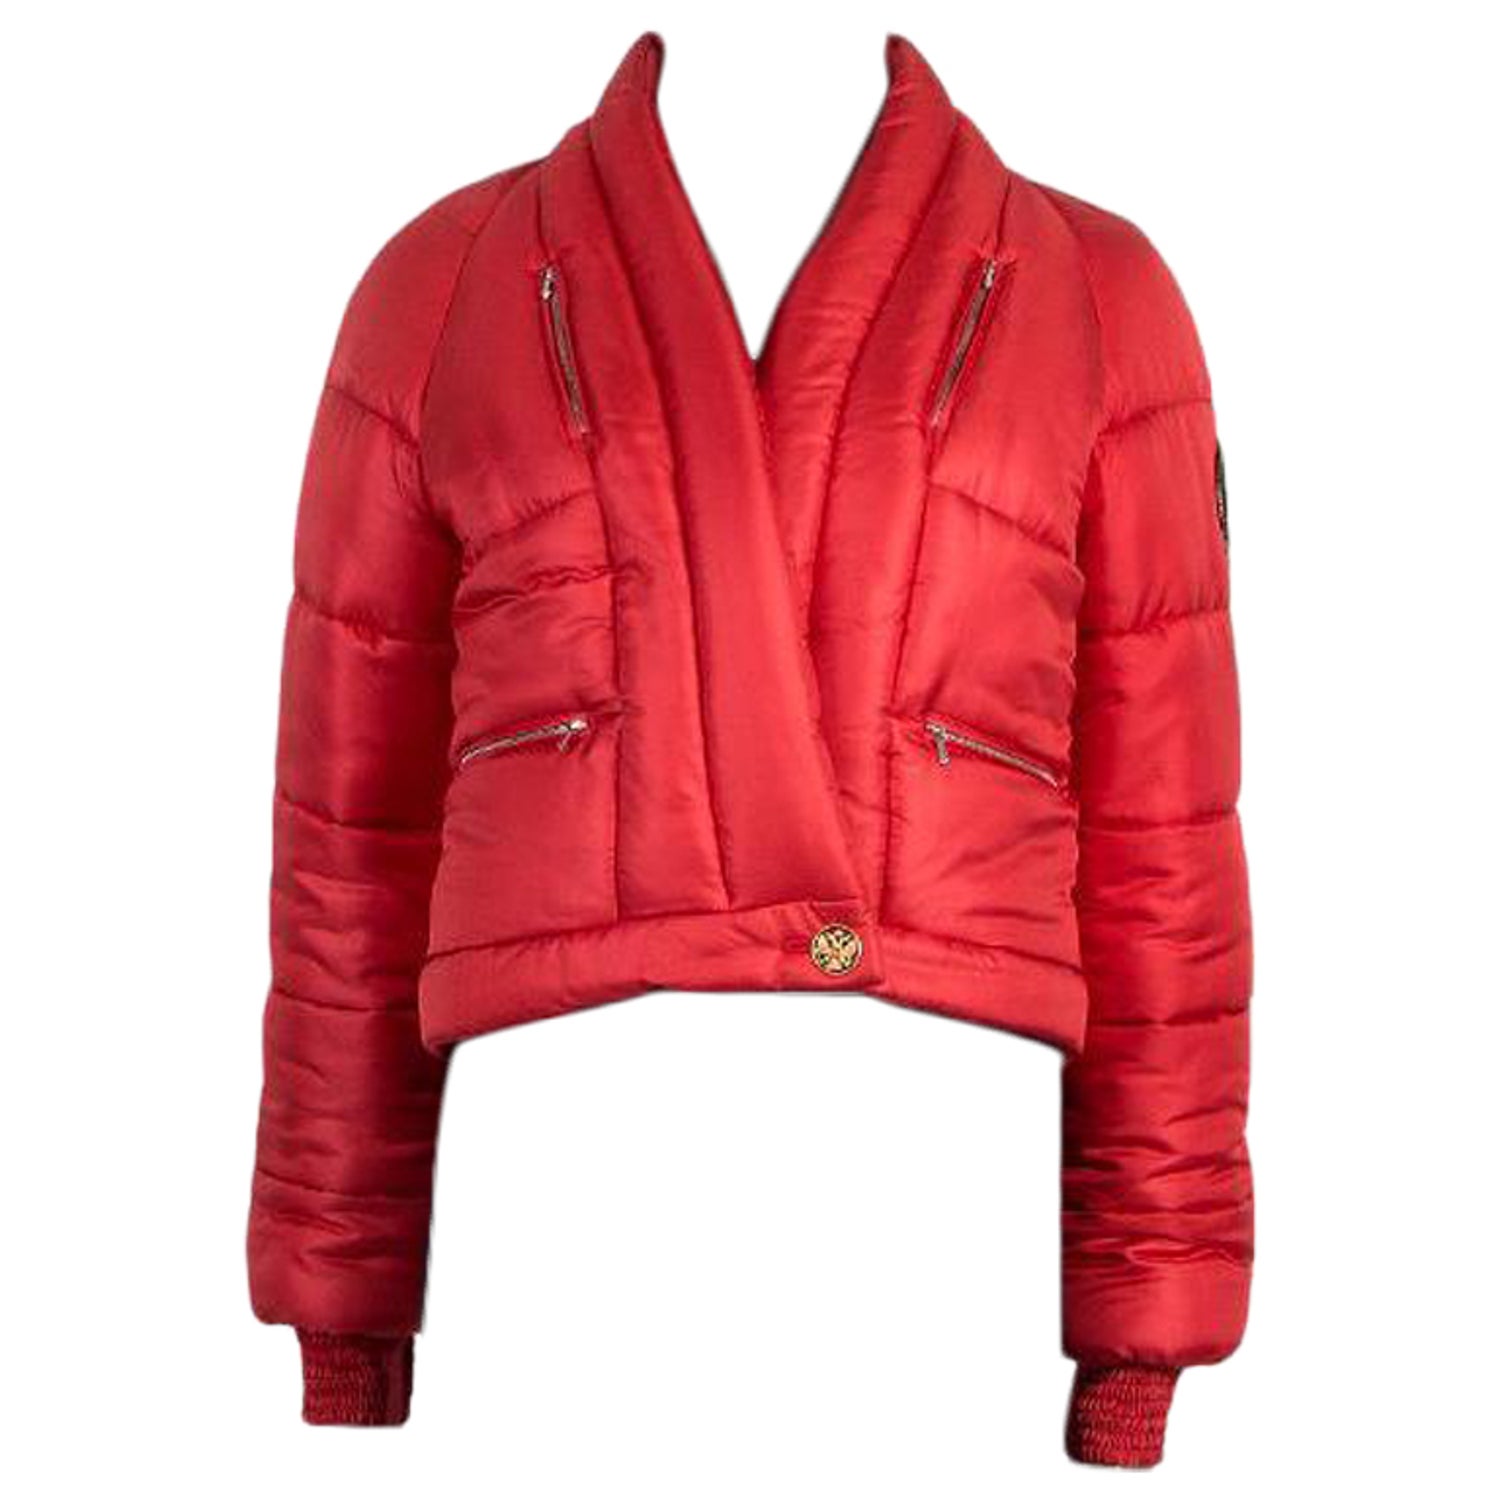 Chanel Red Puffer Jacket - 2 For Sale on 1stDibs